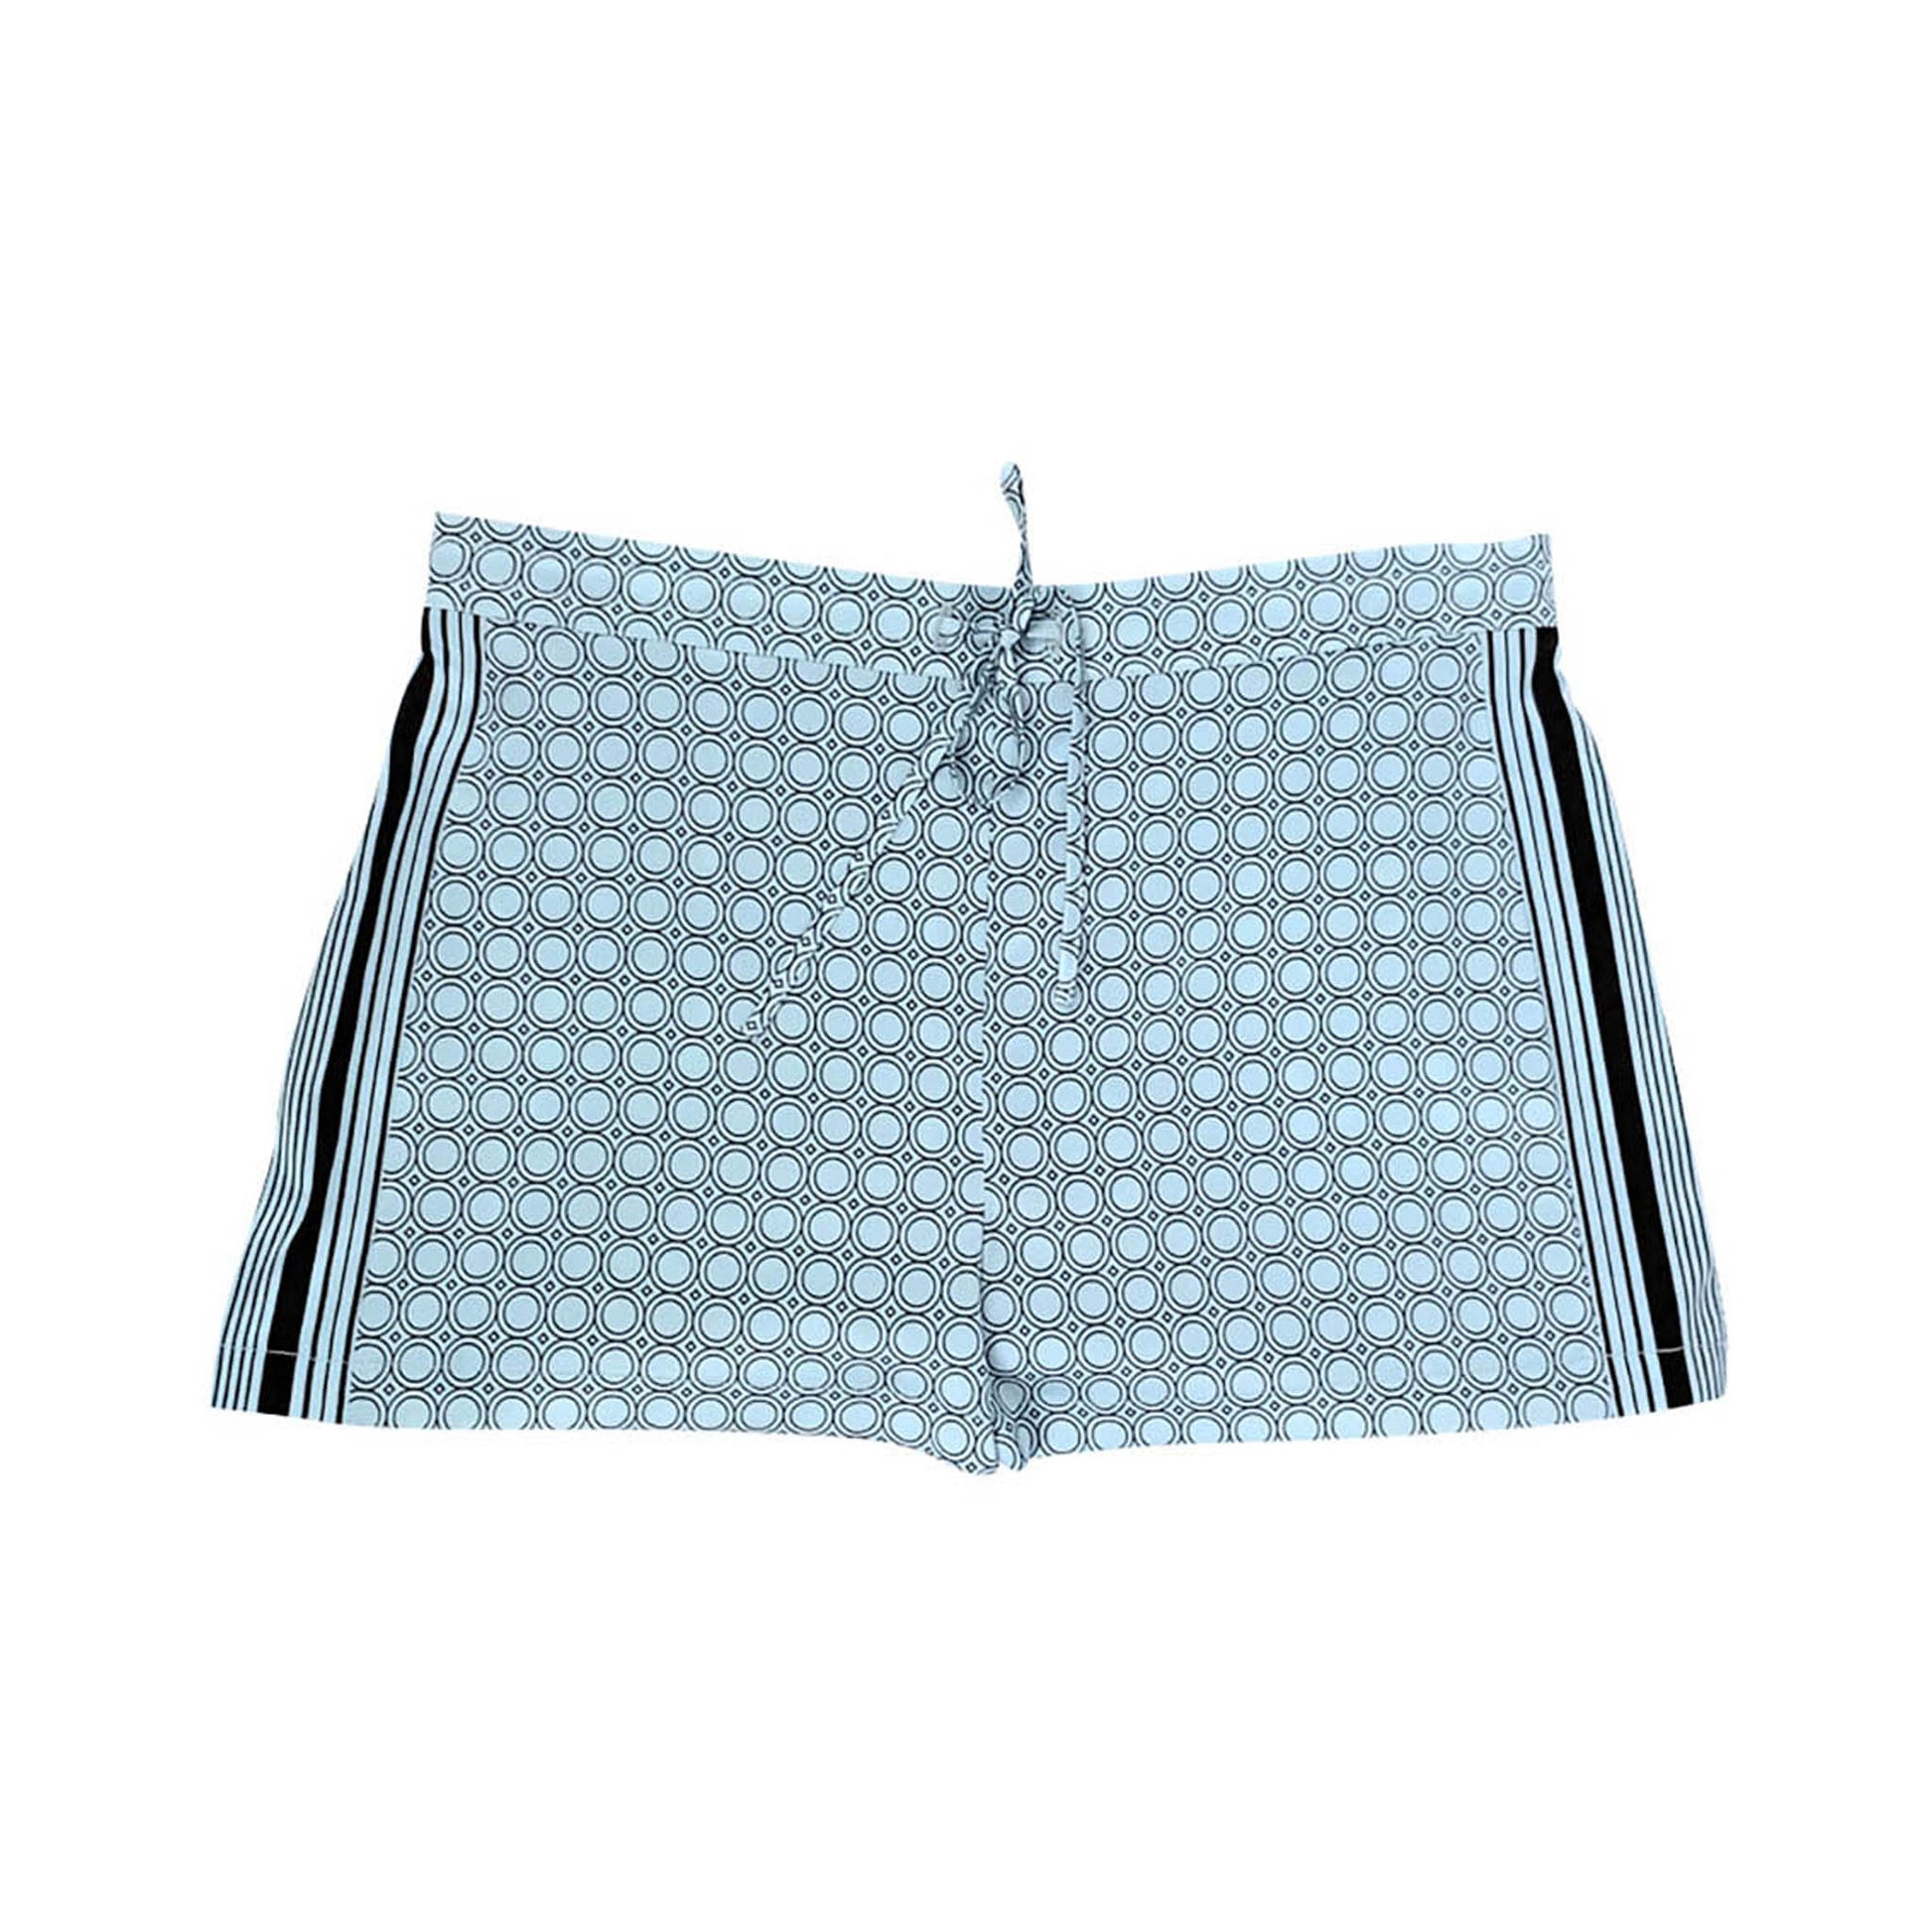 The Lady silk pajama shorts from NOKAYA are crafted from Mulberry silk.